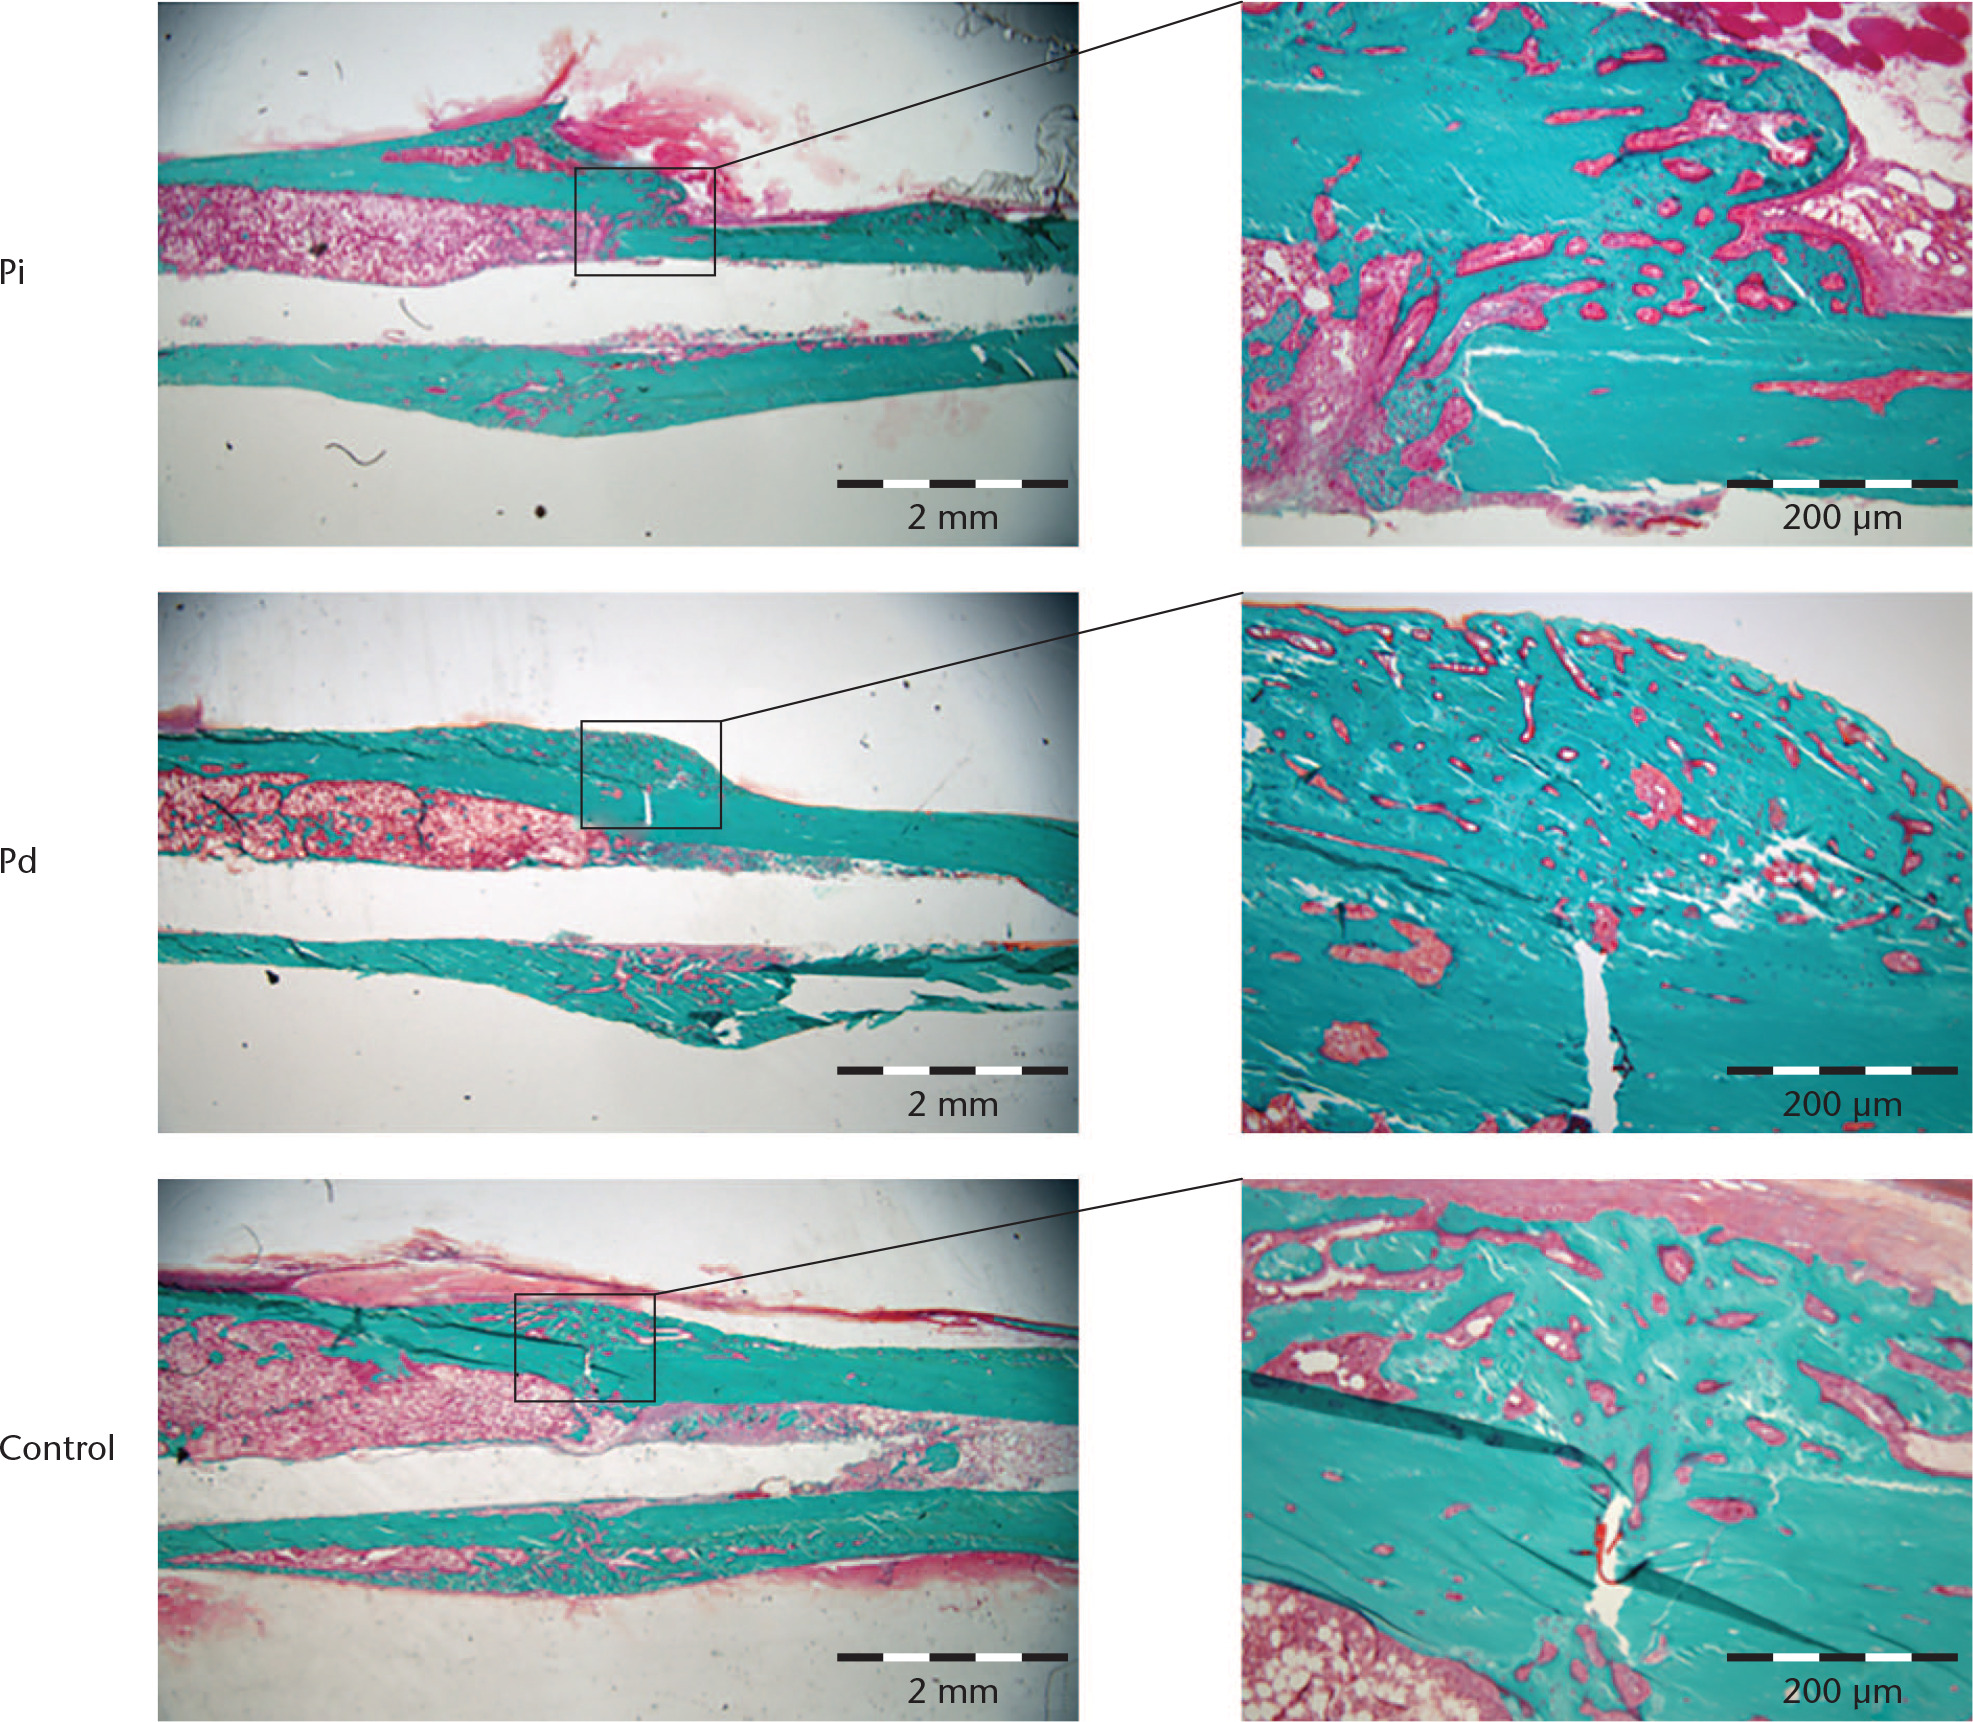 Fig. 6 
            Low-power (left panels) and high-power (right panels) magnification light microscopy of representative Masson–Goldner trichrome-stained sections of tibial fractures from the three study groups. Qualitatively, no differences between the study groups were observed. Scale bars = 2 mm (left panels) and 200 μm (right panels).
          